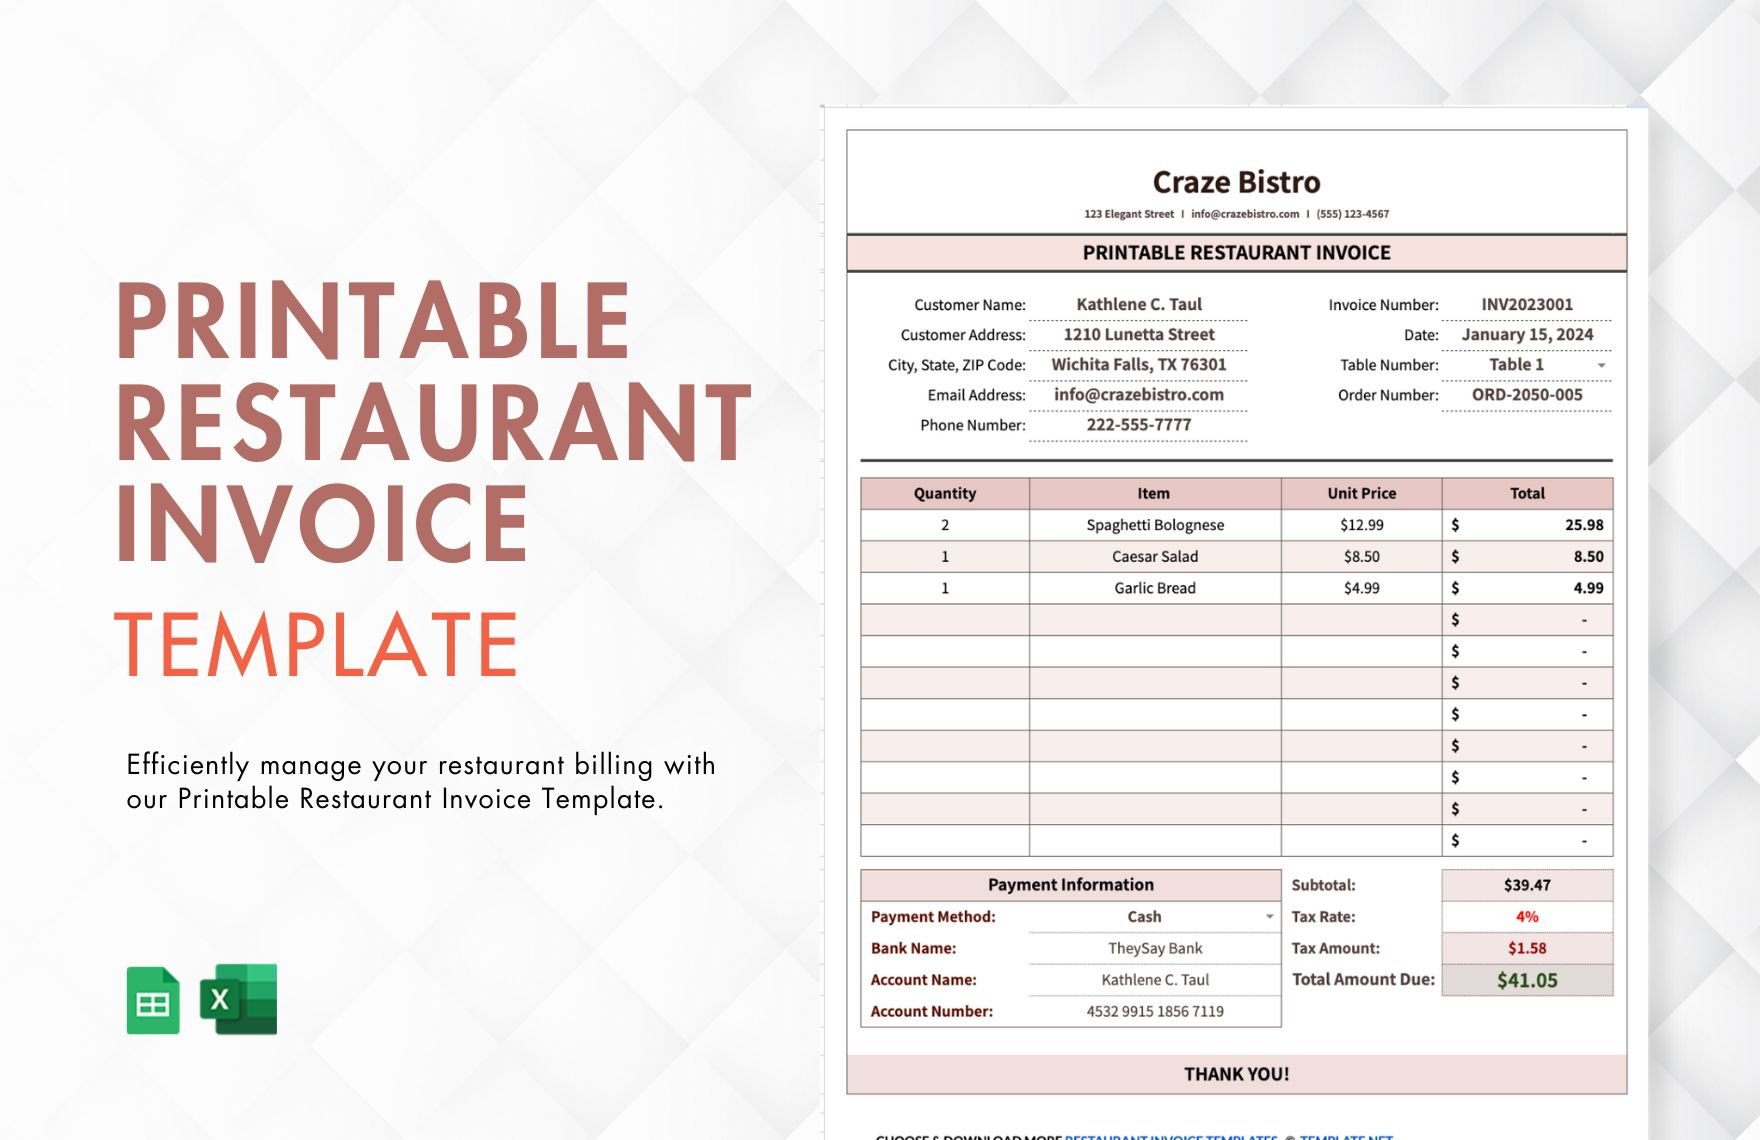 Free Printable Restaurant Invoice Template in Excel, Google Sheets